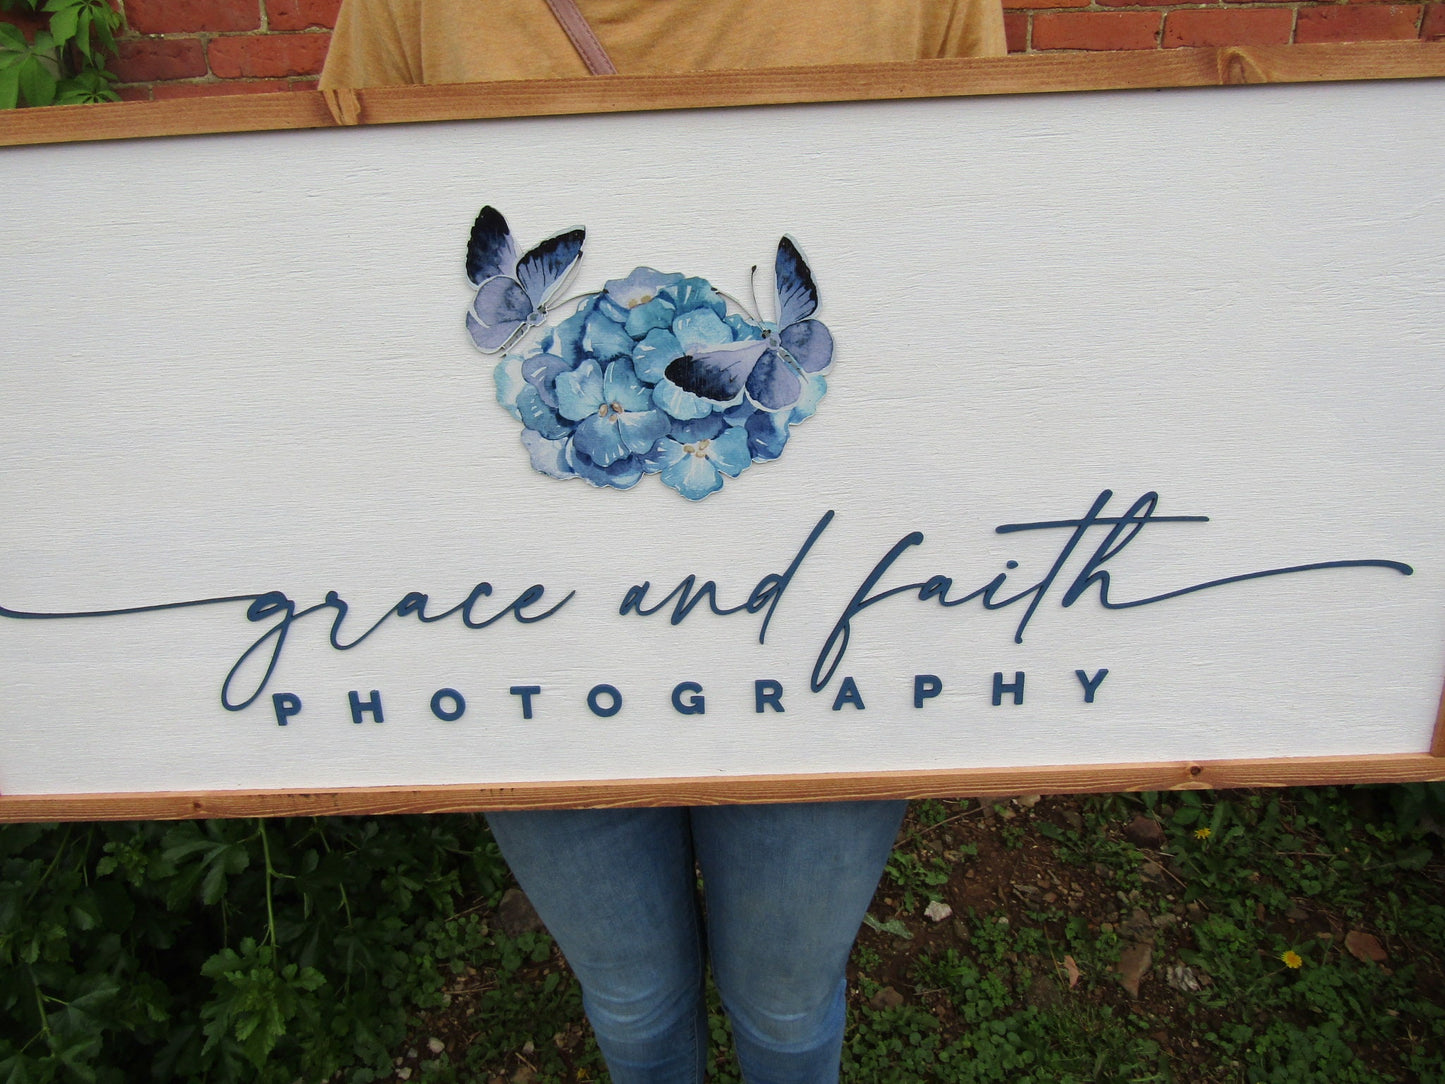 Custom Logo Photography Business Image Printed Raised Lettering Grace and Faith Butterflies Beauty Wooden Handmade Decor Photographer Sign